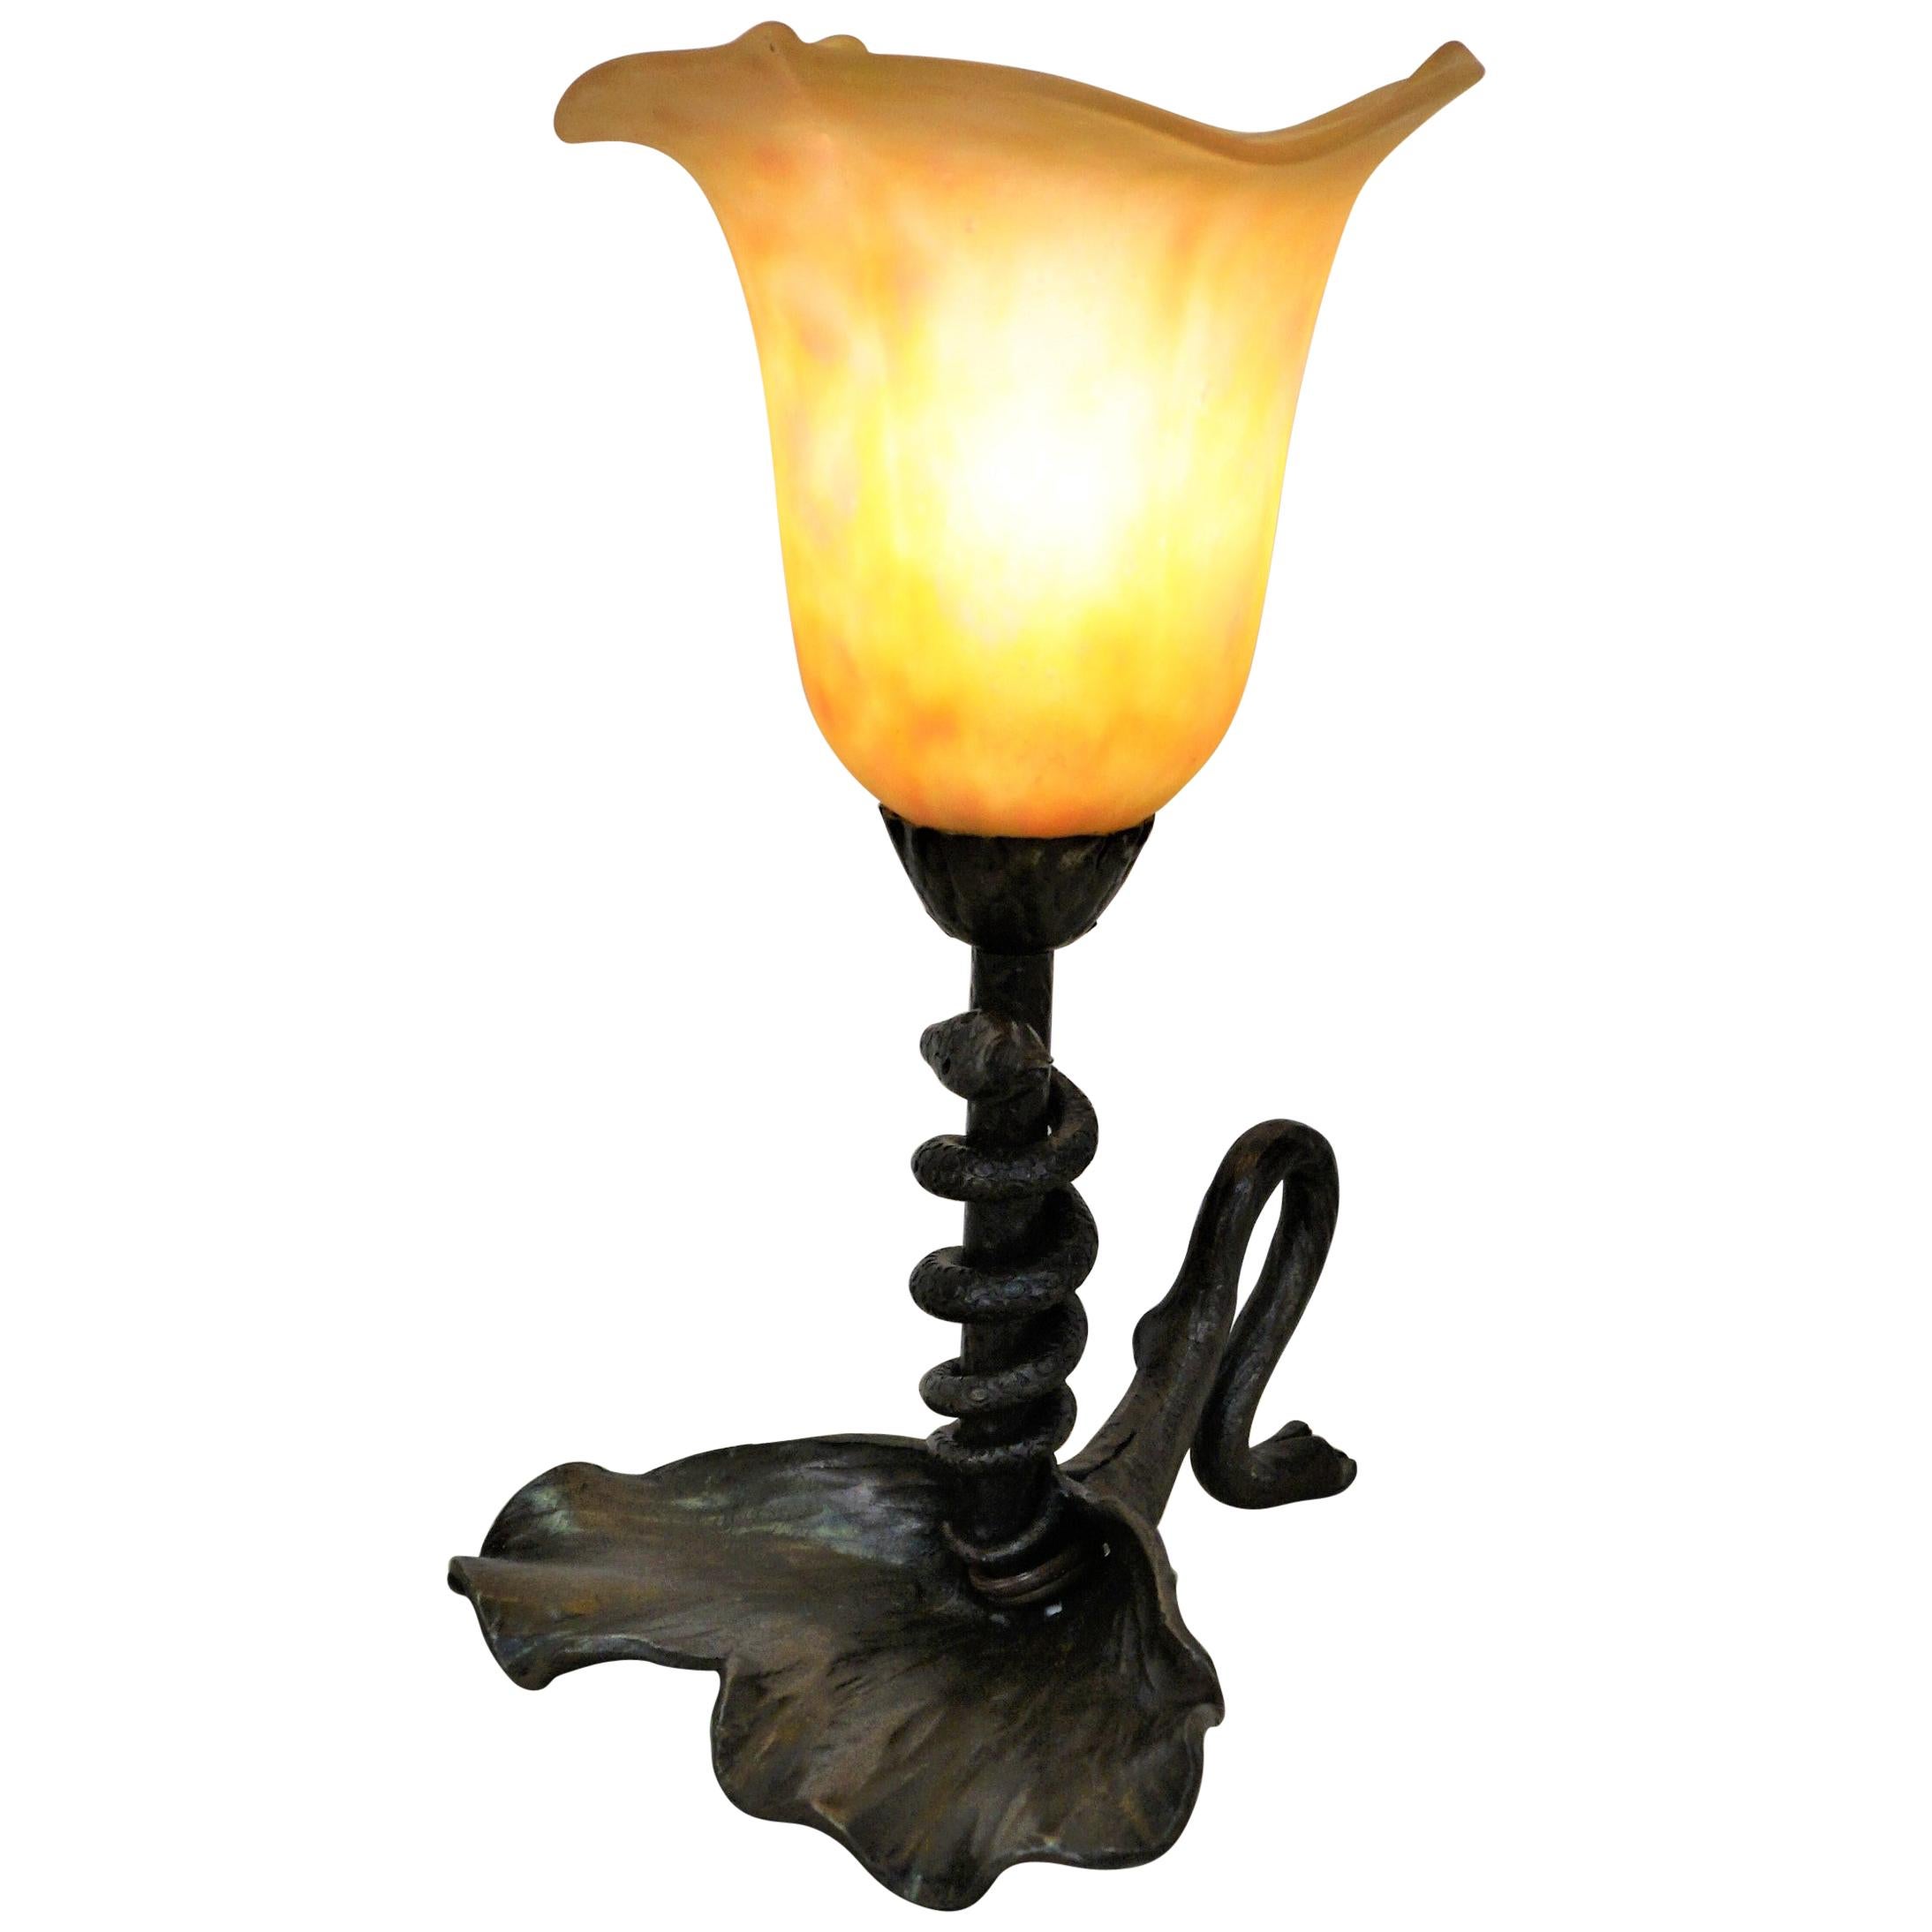 Wrought Iron Table Lamp with Snake Motif and Art Glass Shade by Daum